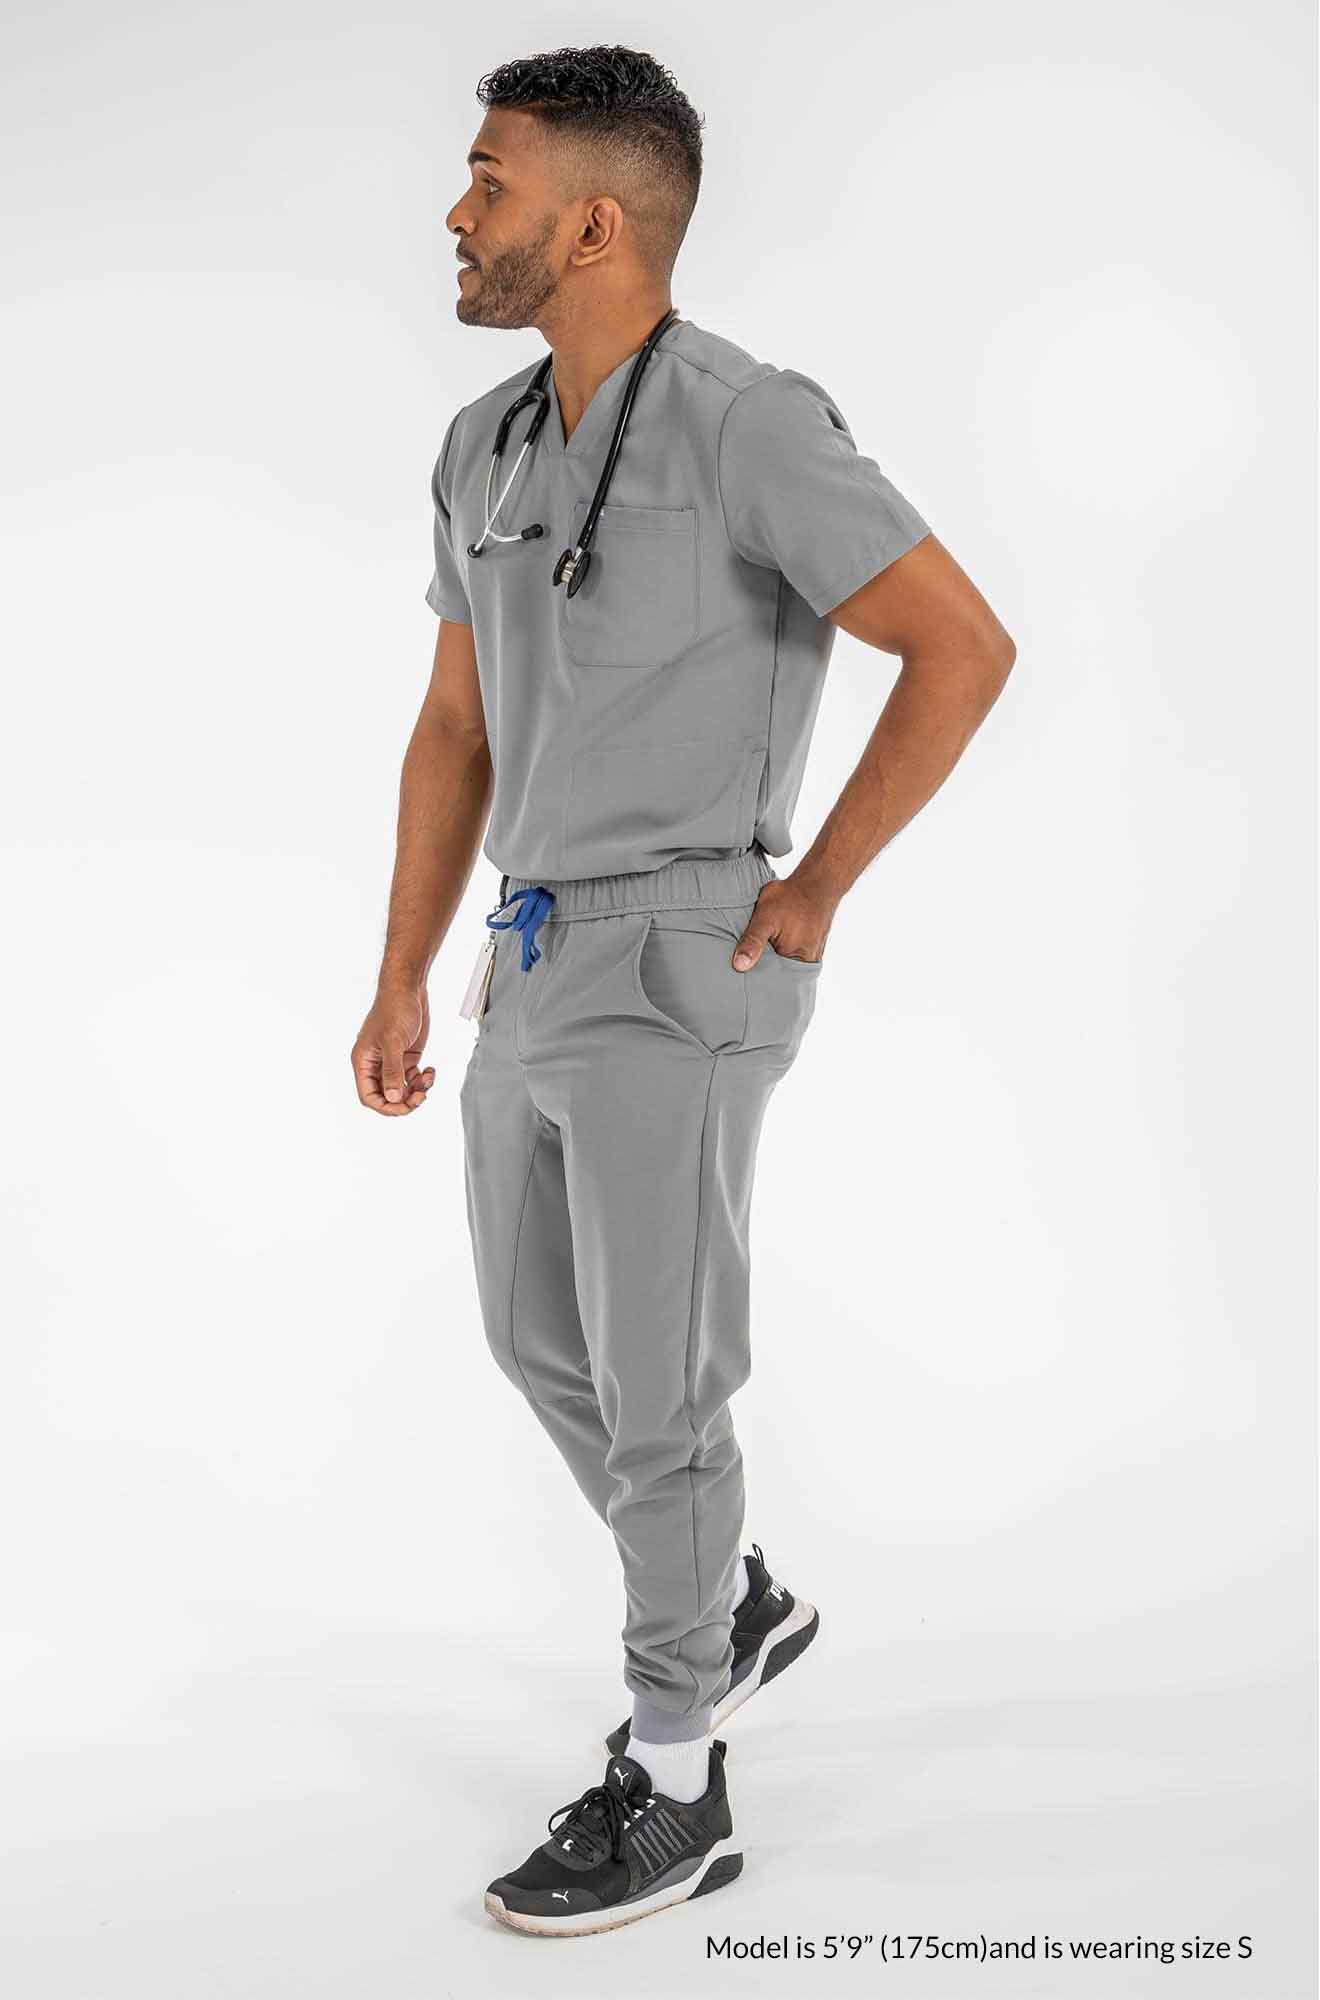 Men's AESON Scrub Top, Gentleman featuring the scrub pants, His hand is on the back of the scrub pants #colour_grey